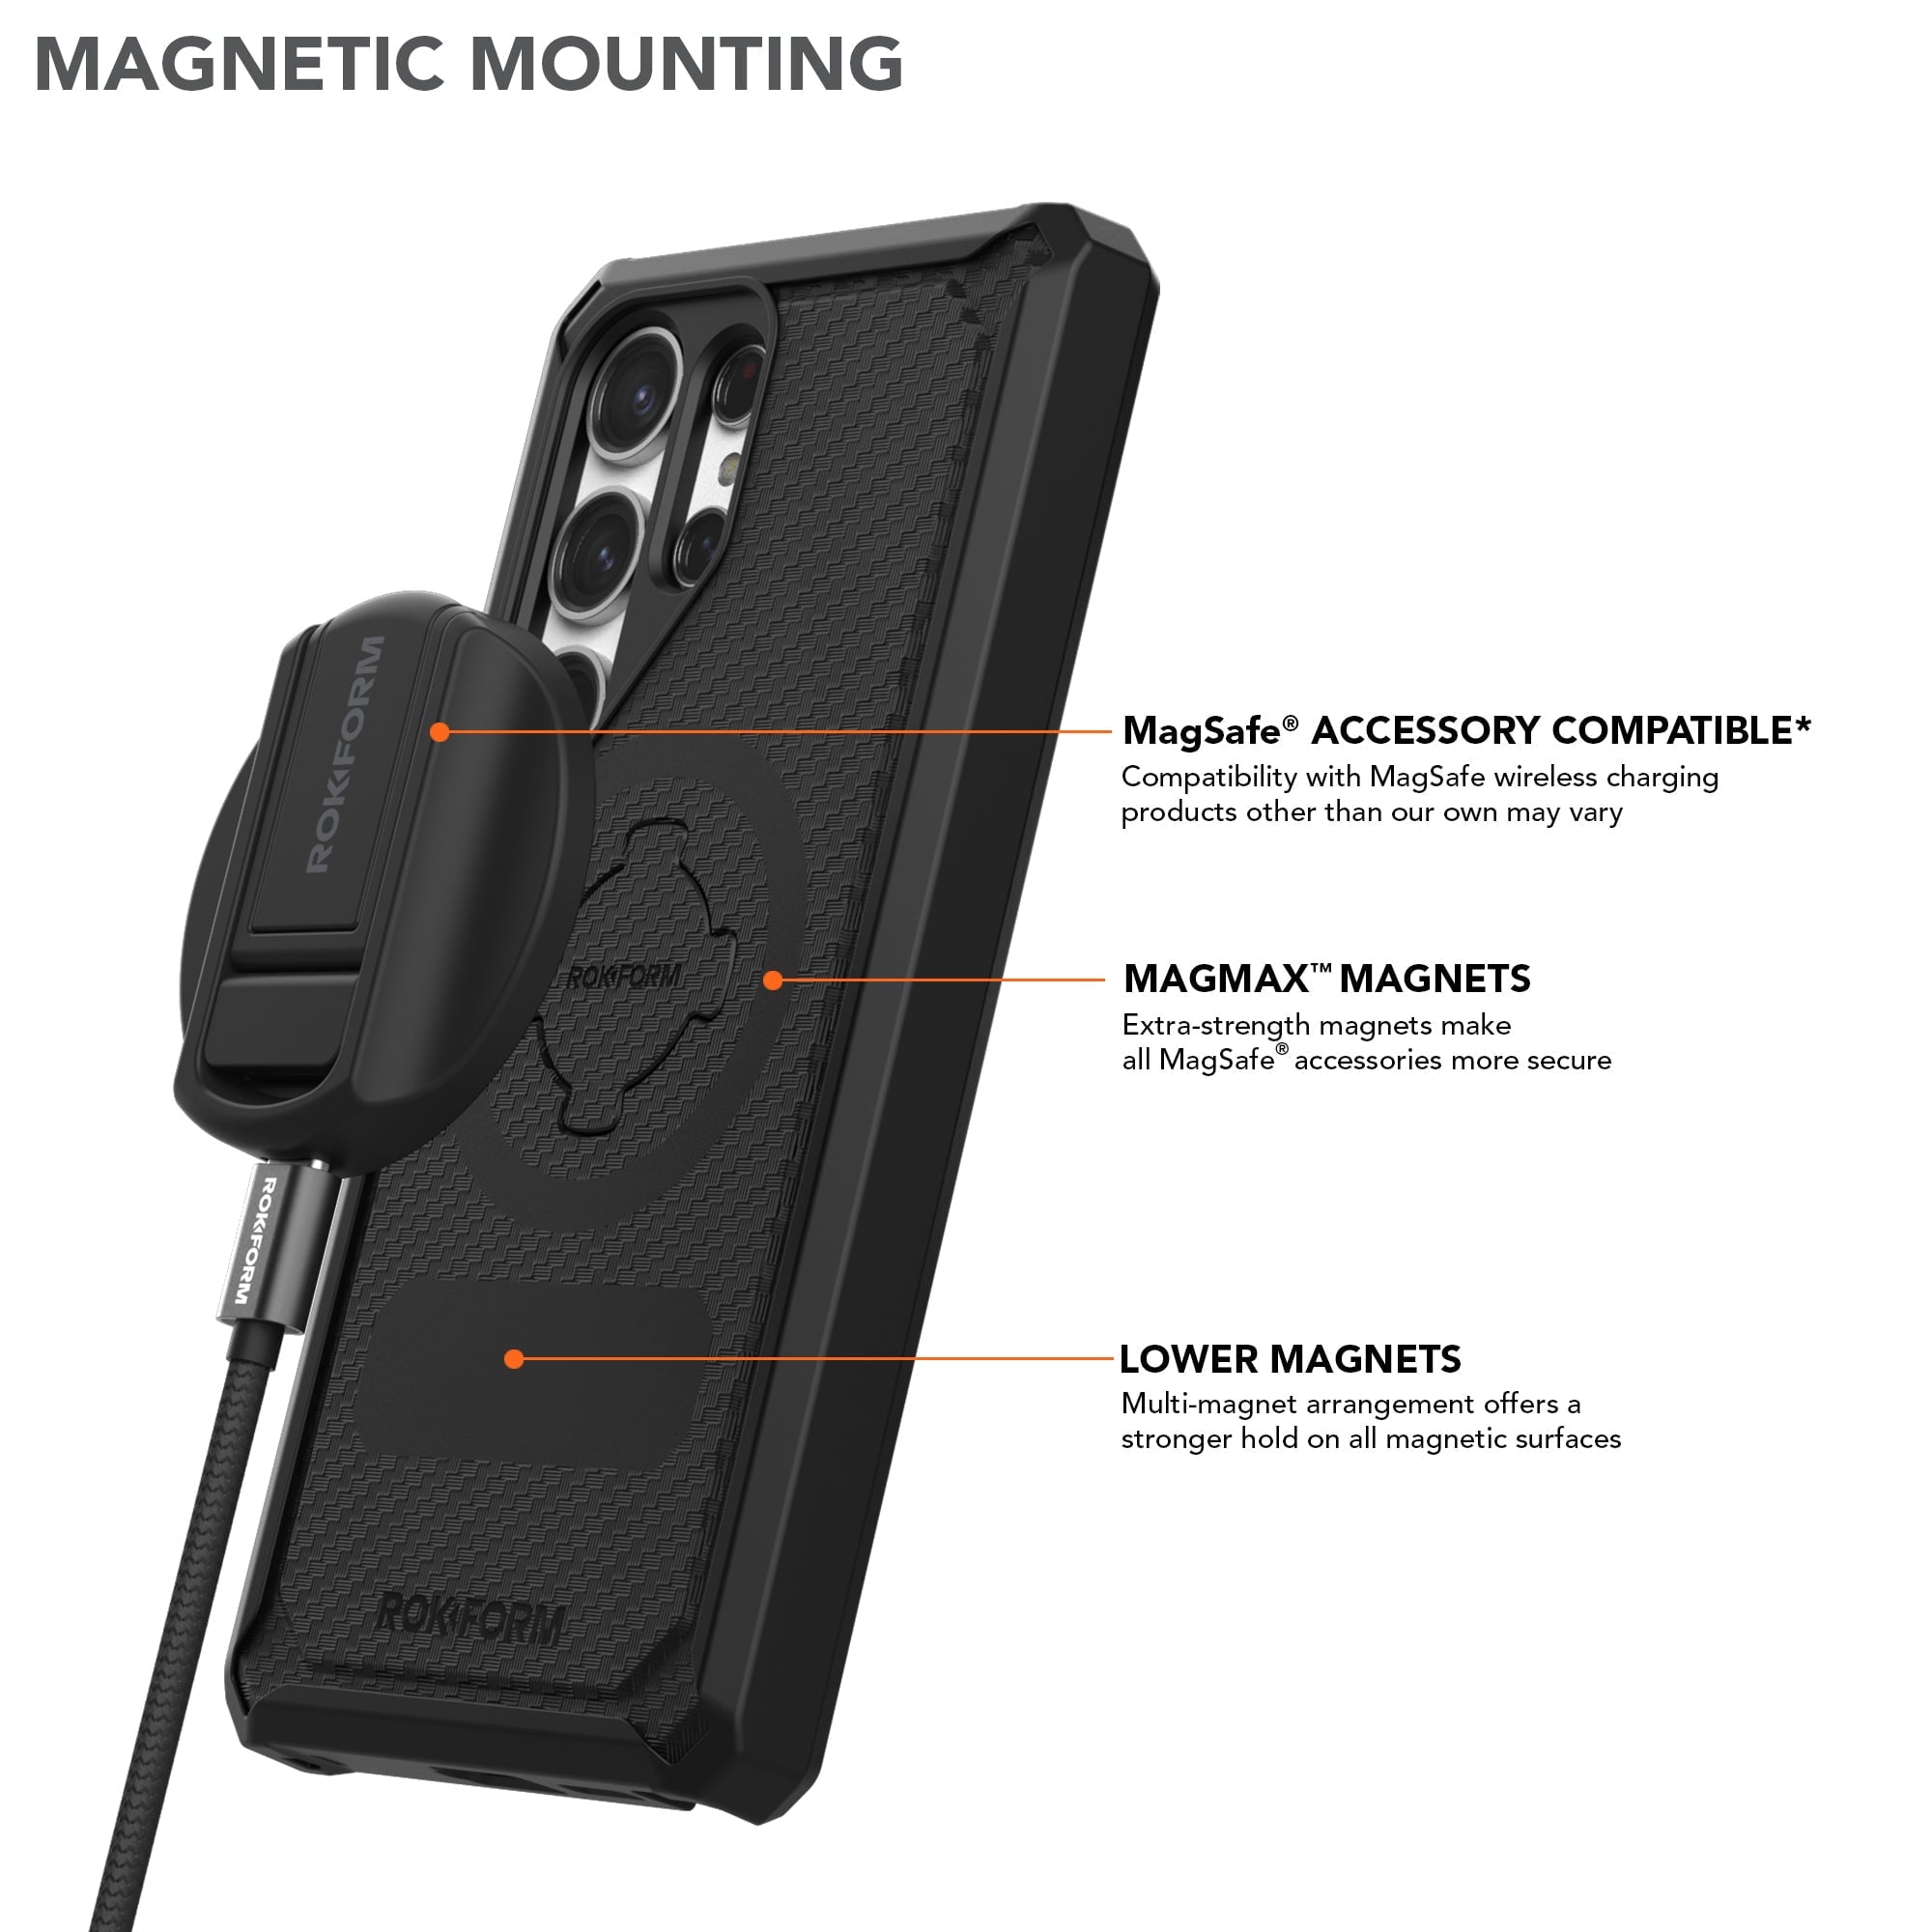 Samsung Galaxy S24 ULTRA Magnetic Mounting